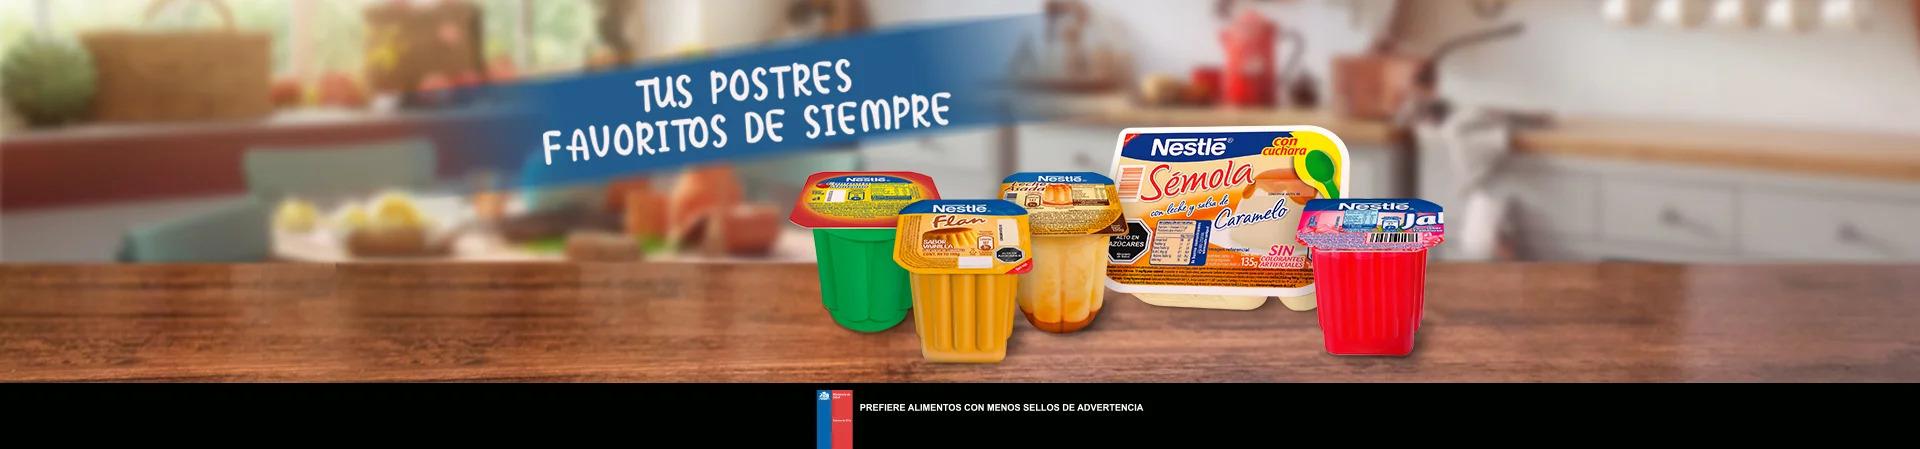 a-set-of-tradicionale-nestle-products